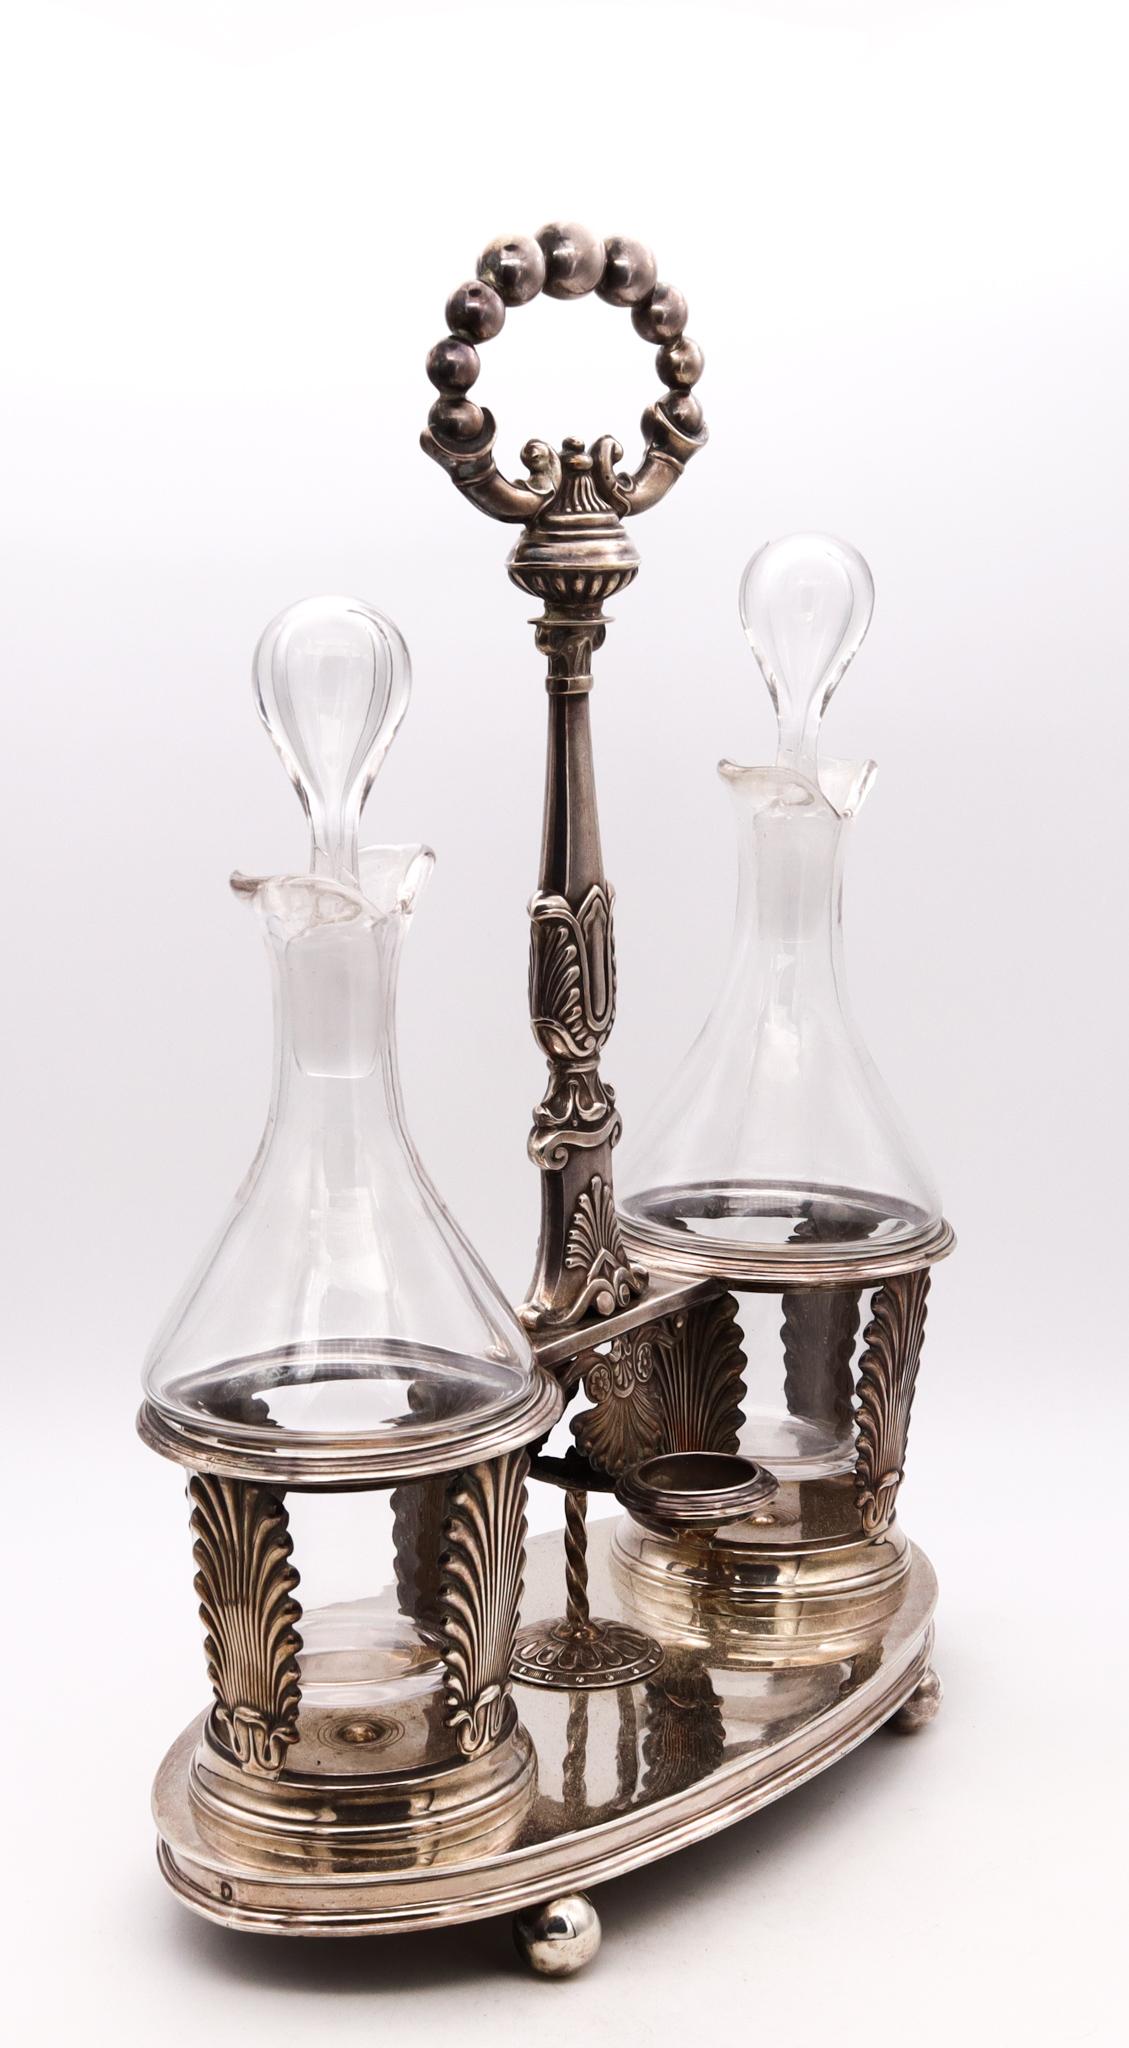 Mid-19th Century France Lyon 1838 By Armand Caillat Neoclassical Hoilier Cruet Set .950 Sterling For Sale